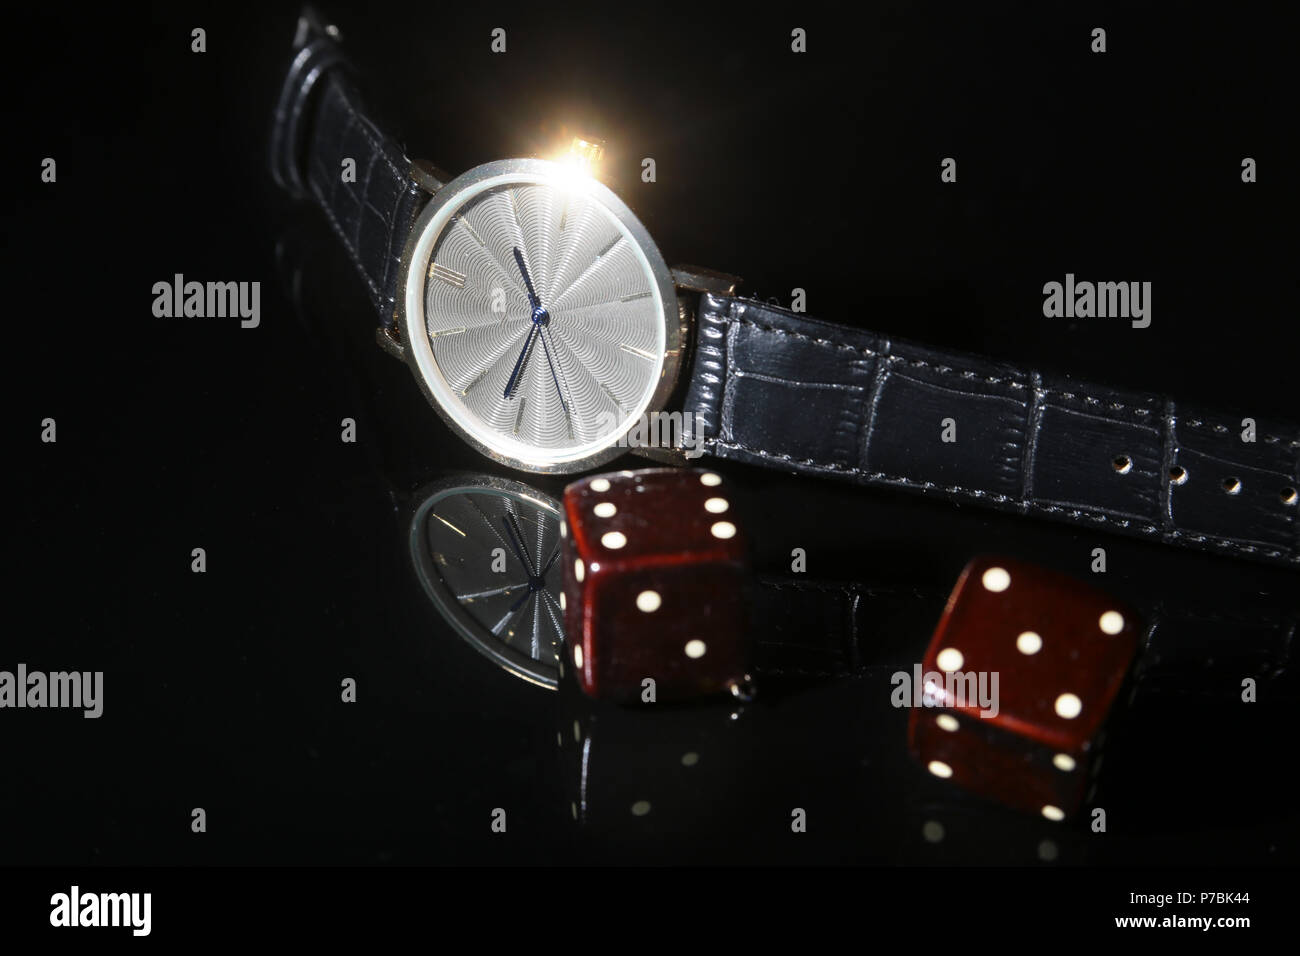 Men's accessories for business and rekreation. Watch and dice on black mirror background.. Top view composition. Stock Photo